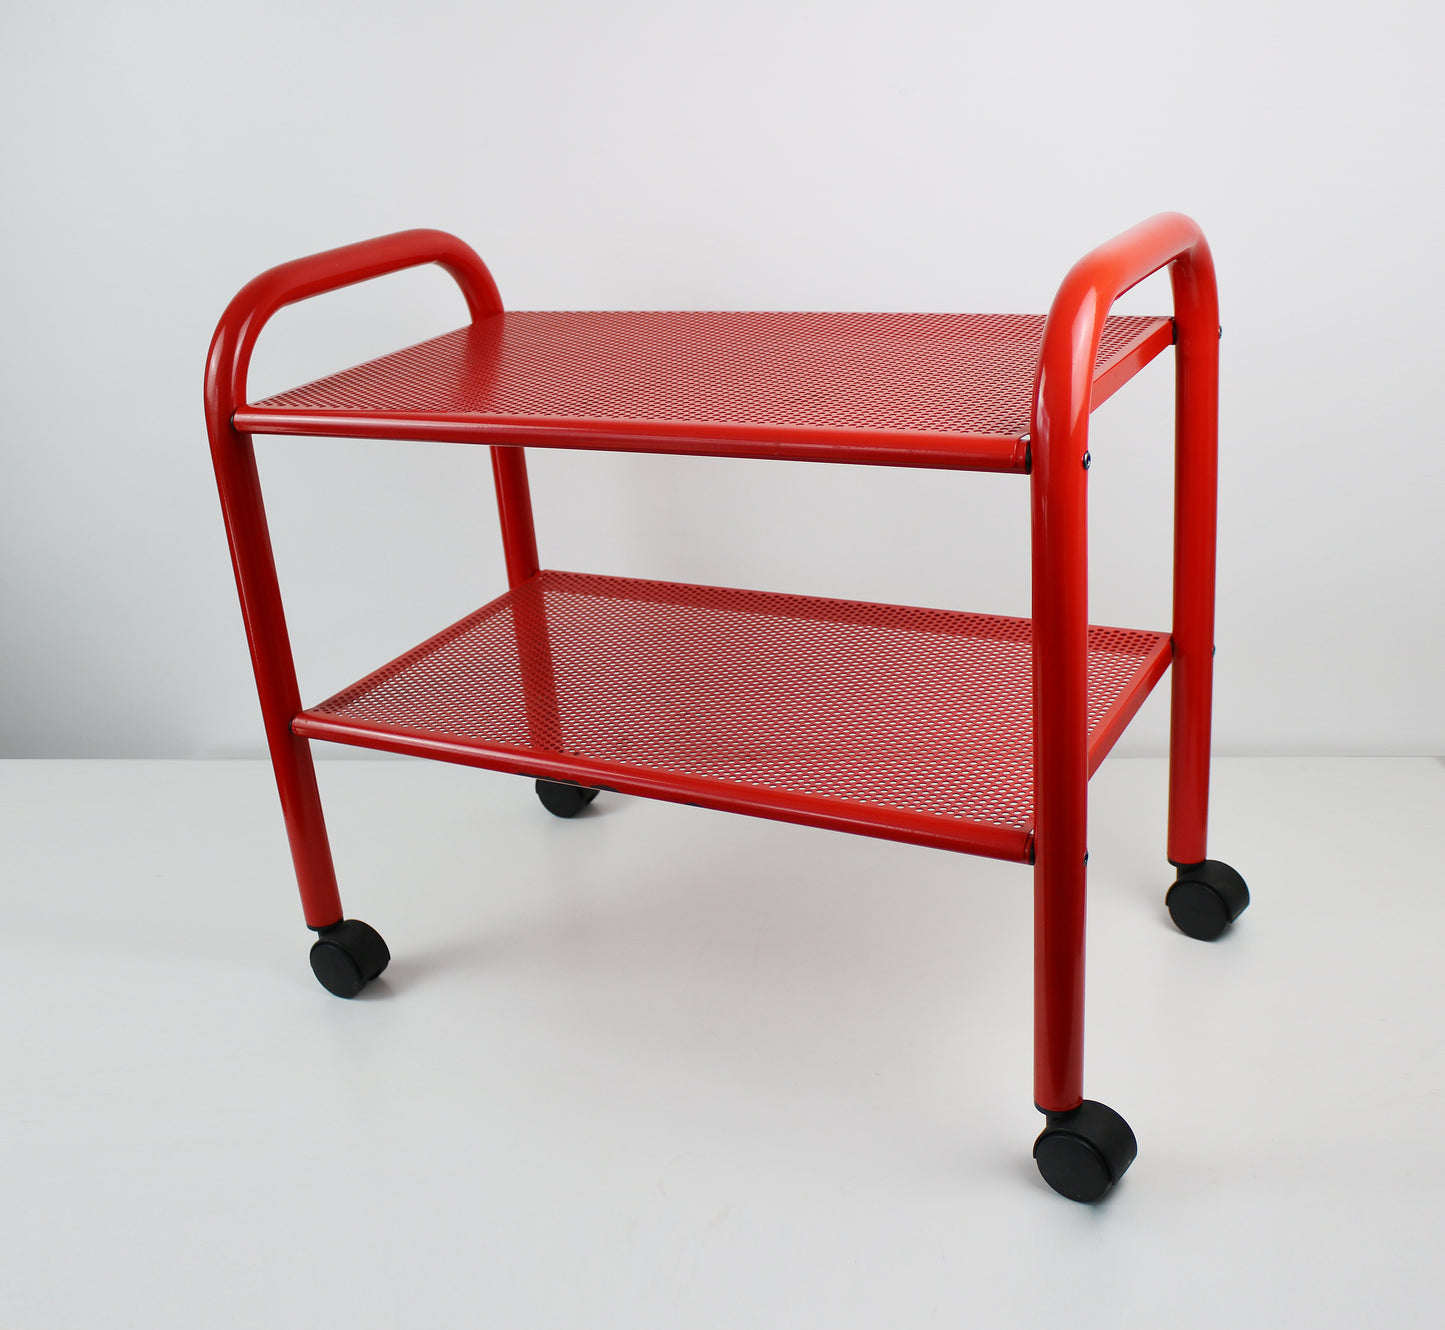 Conran for Habitat 1980s trolley in red perforated metal